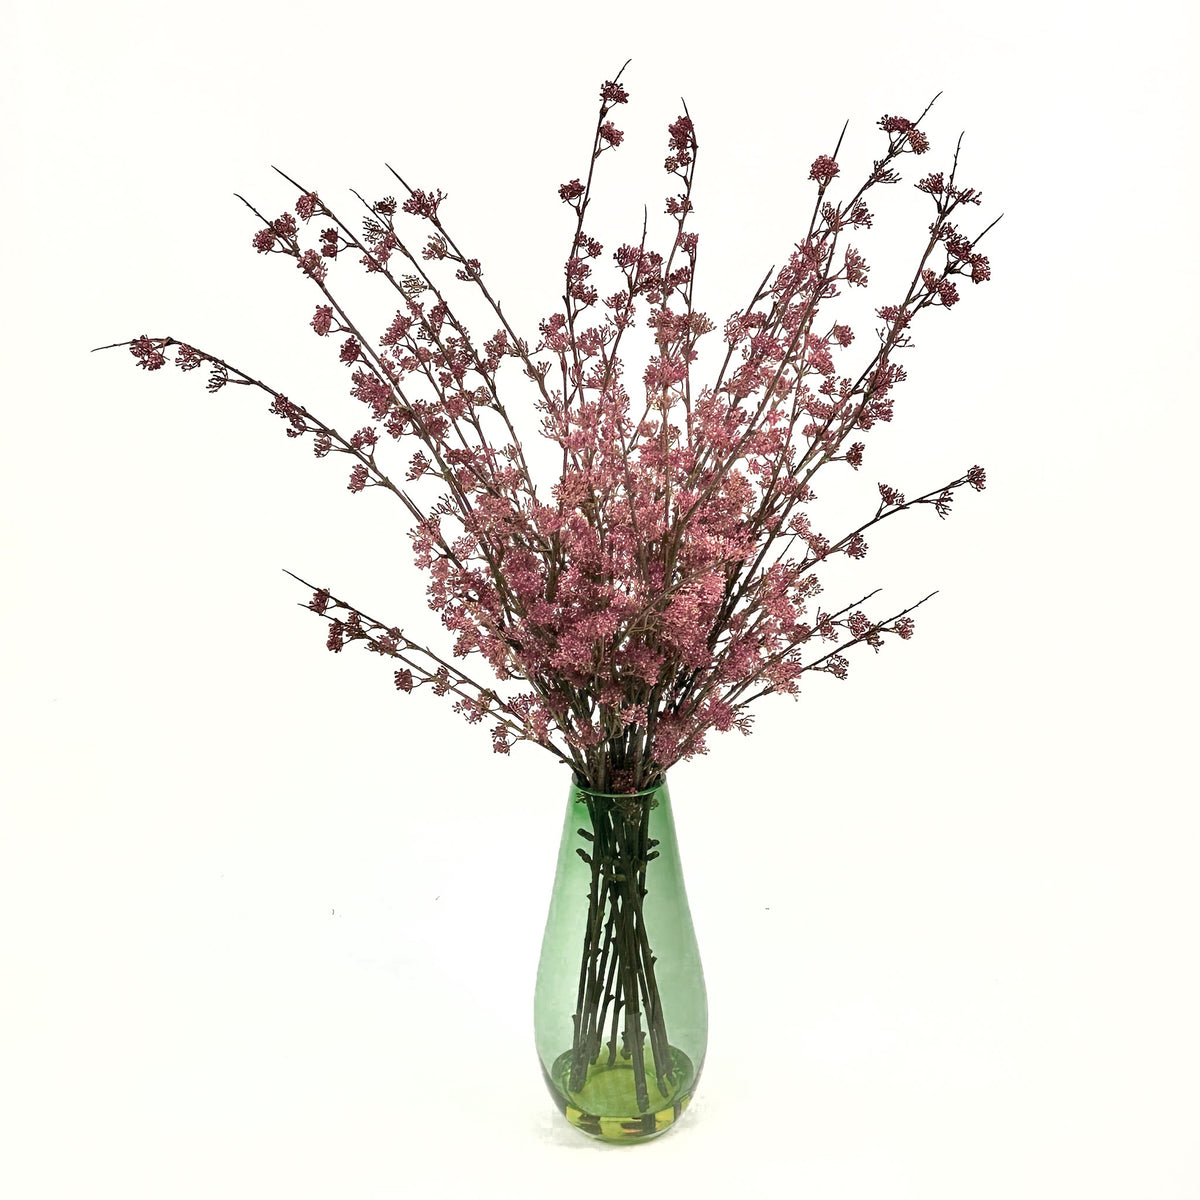 an arrangement of Berry Sprays in a vibrant pink and purple all inside a green shaded glass vase